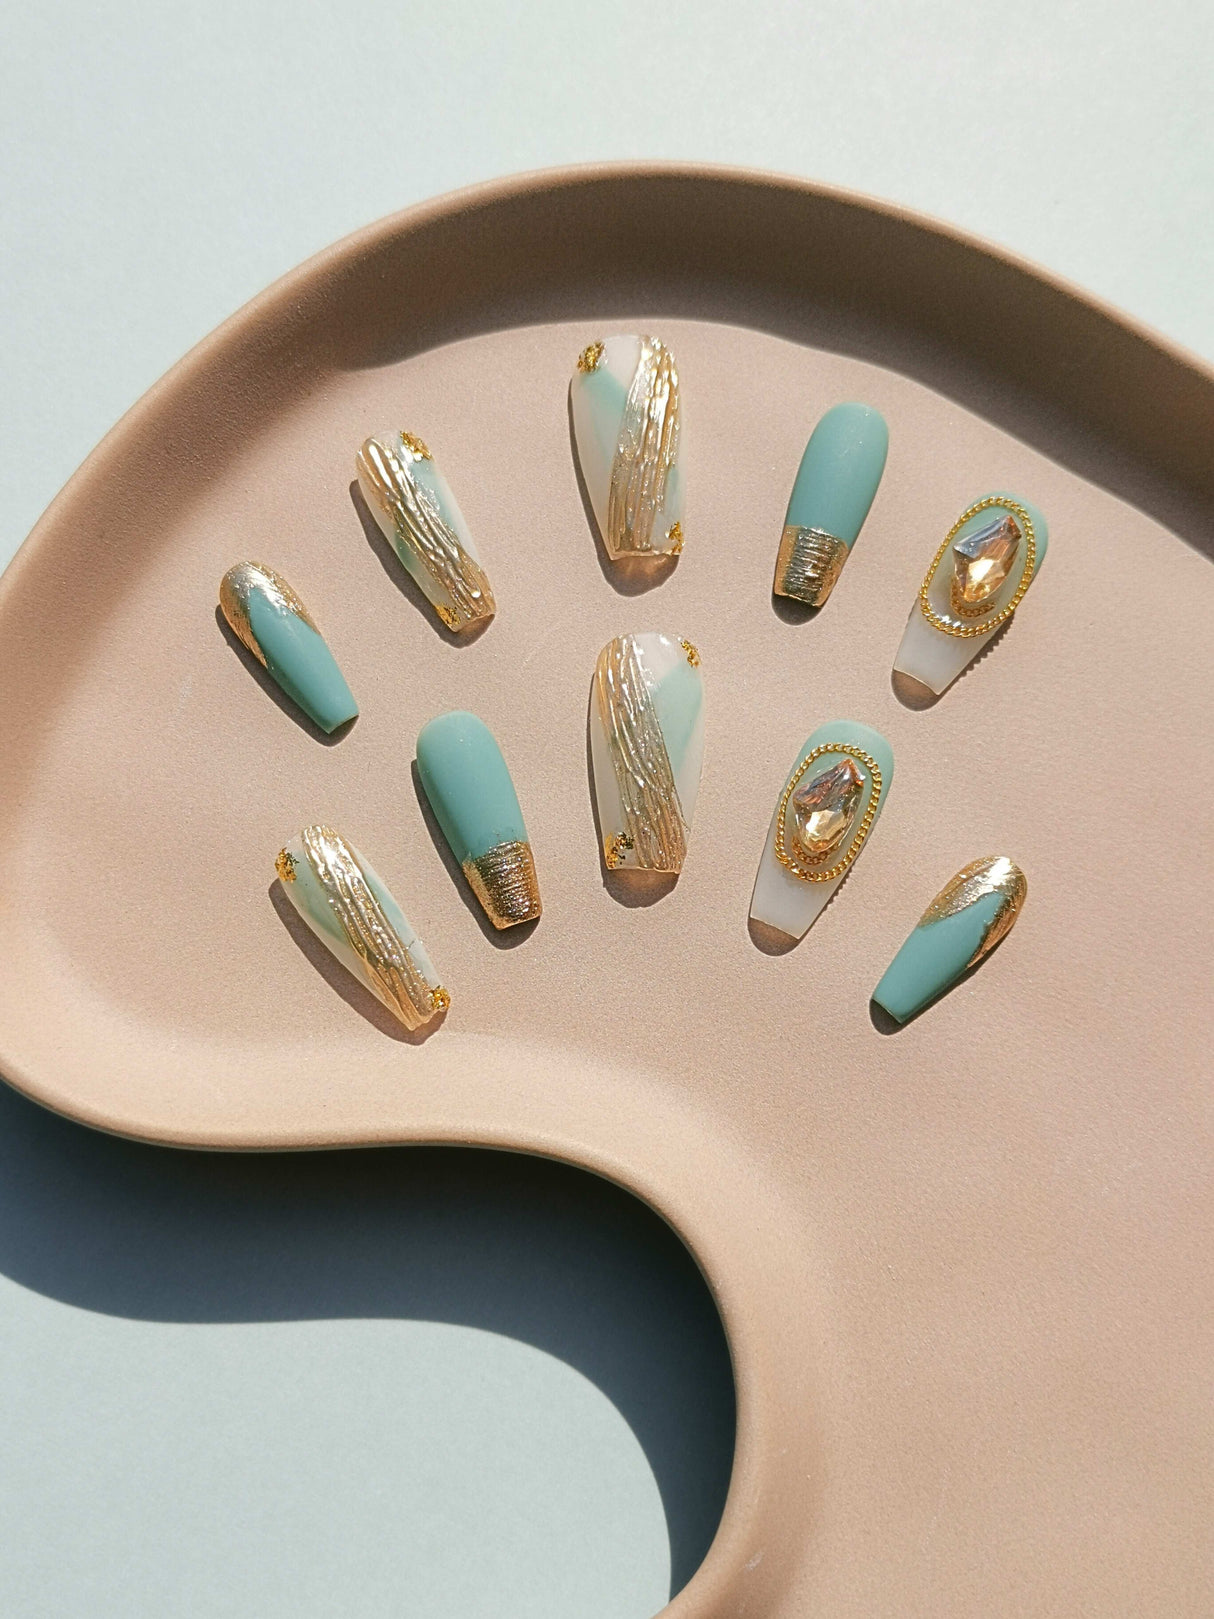 These press-on nails are designed for a fashionable and formal occasion, featuring a combination of modern and art deco elements with a seafoam green and metallic gold color scheme. 